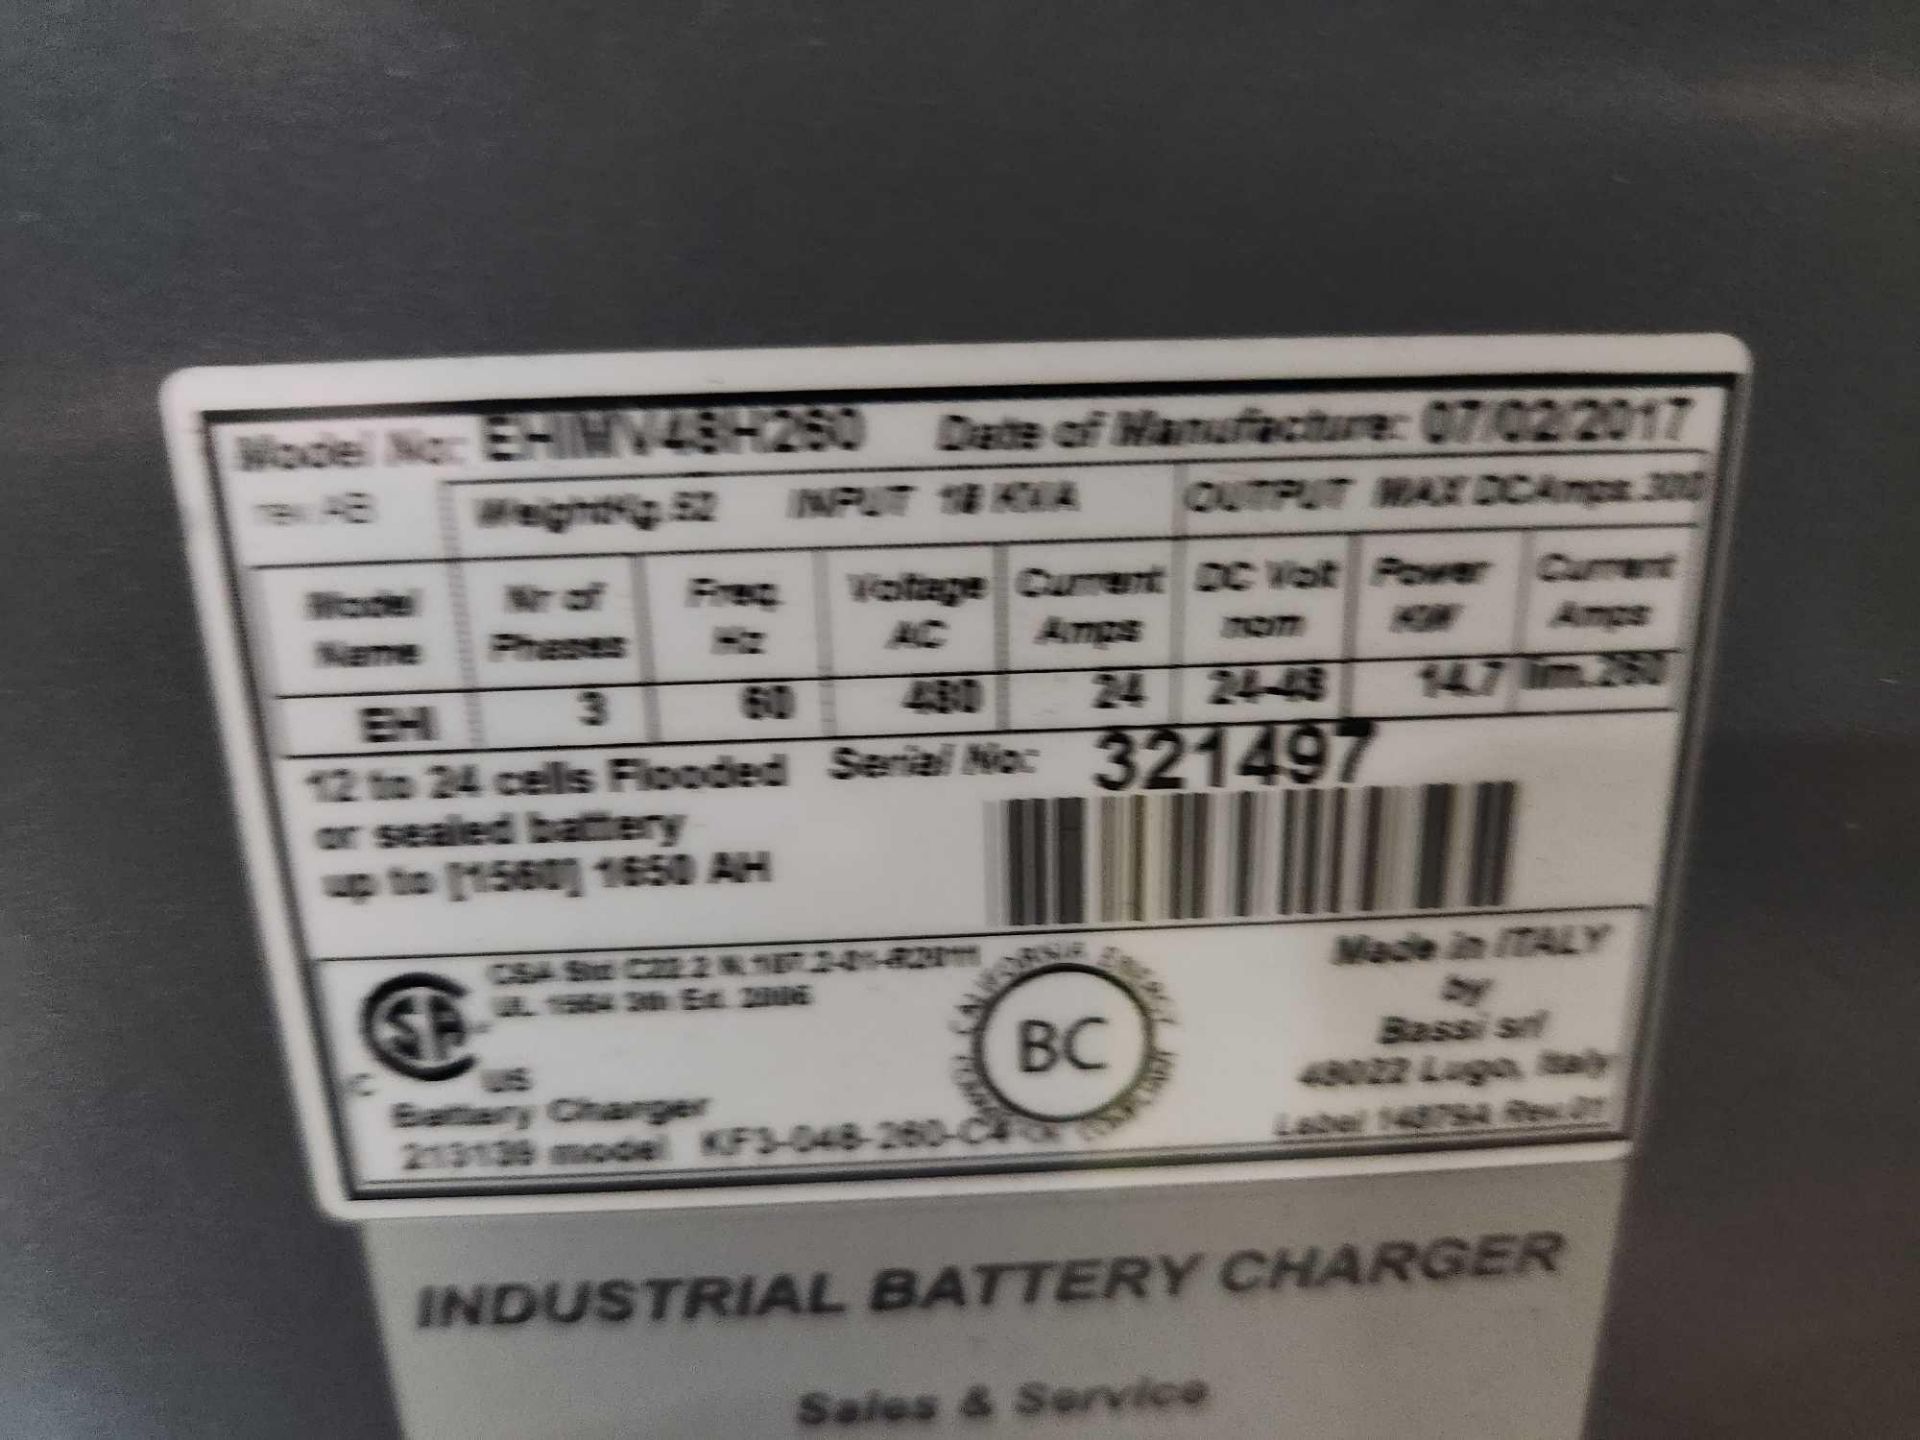 2017 GNB battery charger, mn EHIMV48H260, 3 phase with stand (CHARGER 6) (WAREHOUSE) - Image 3 of 3